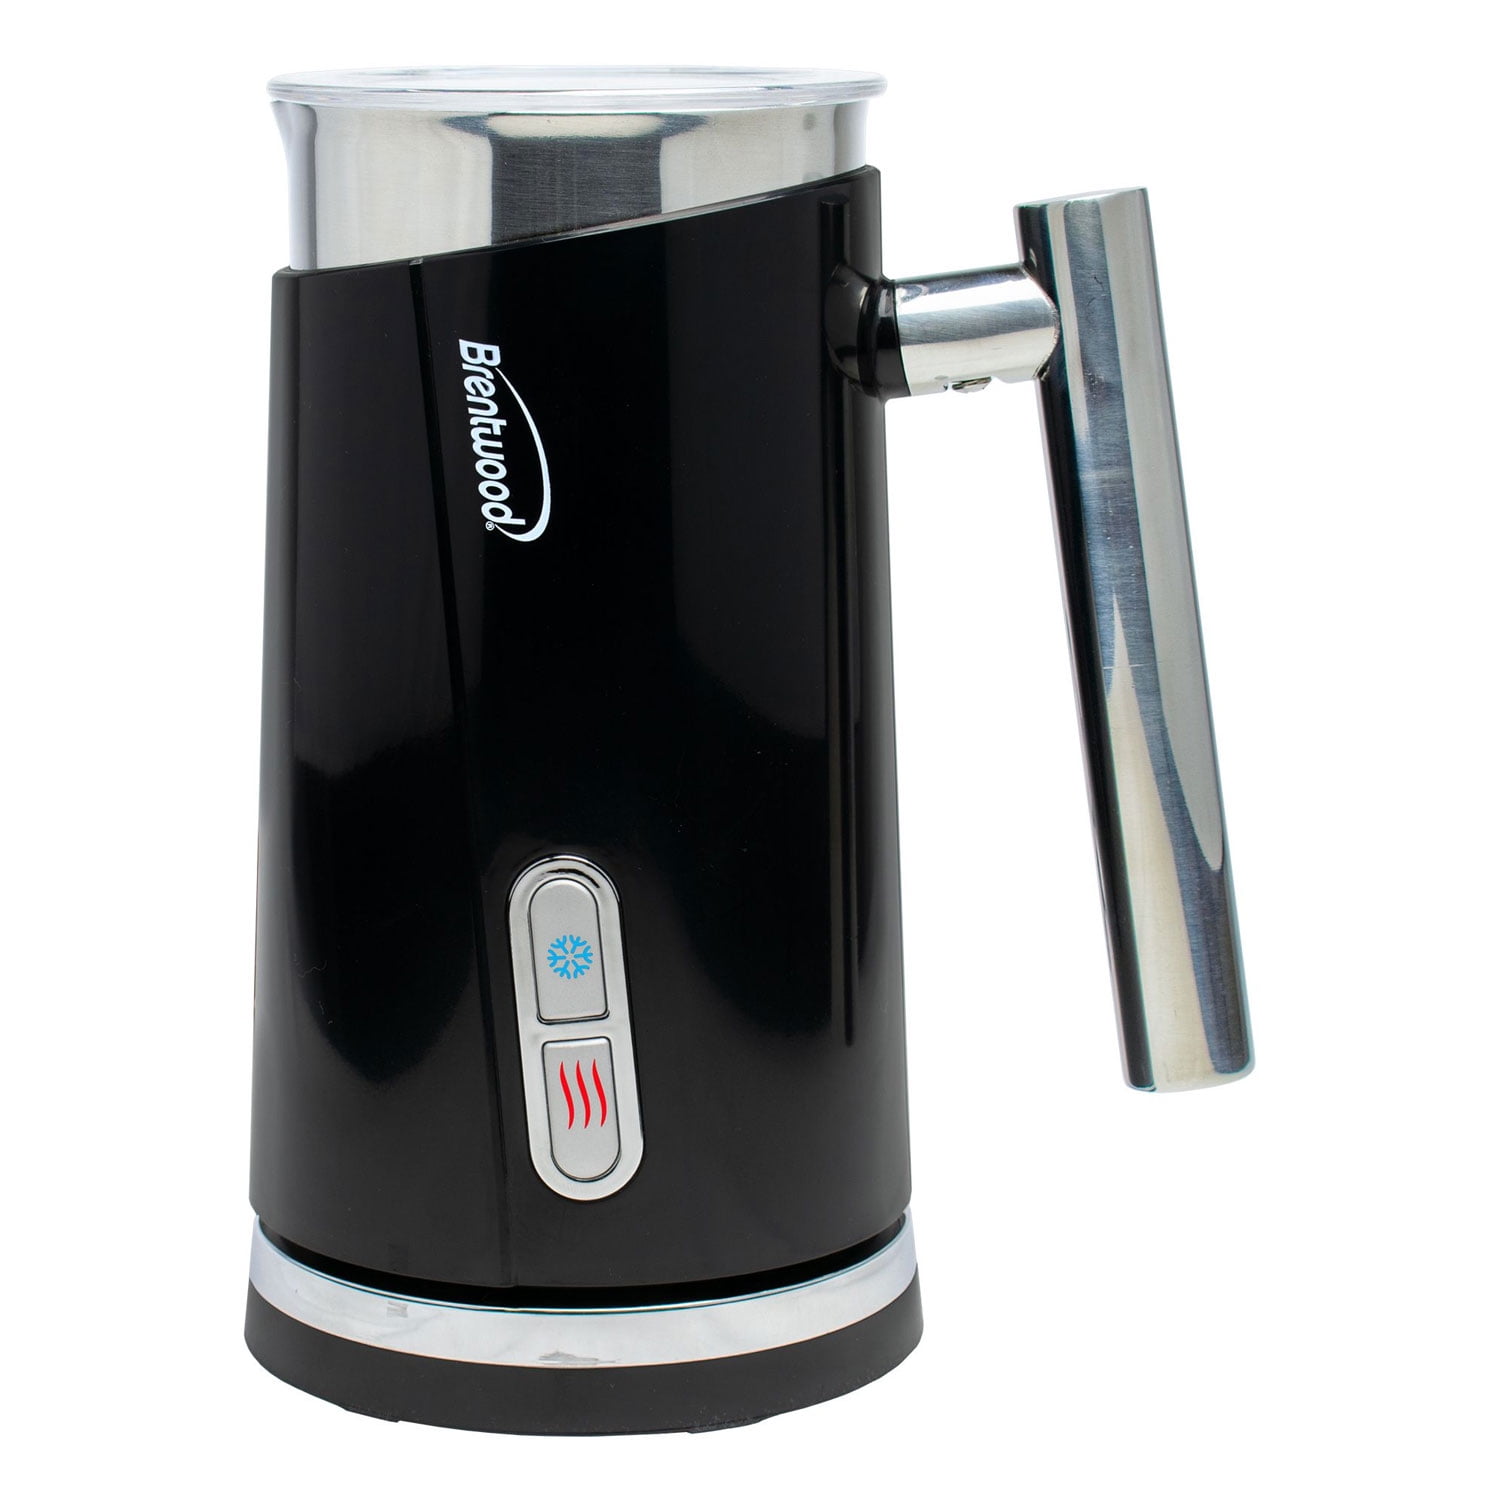 N1- Electric Milk Frother Powerful 22000 RPM Motor, High Quality